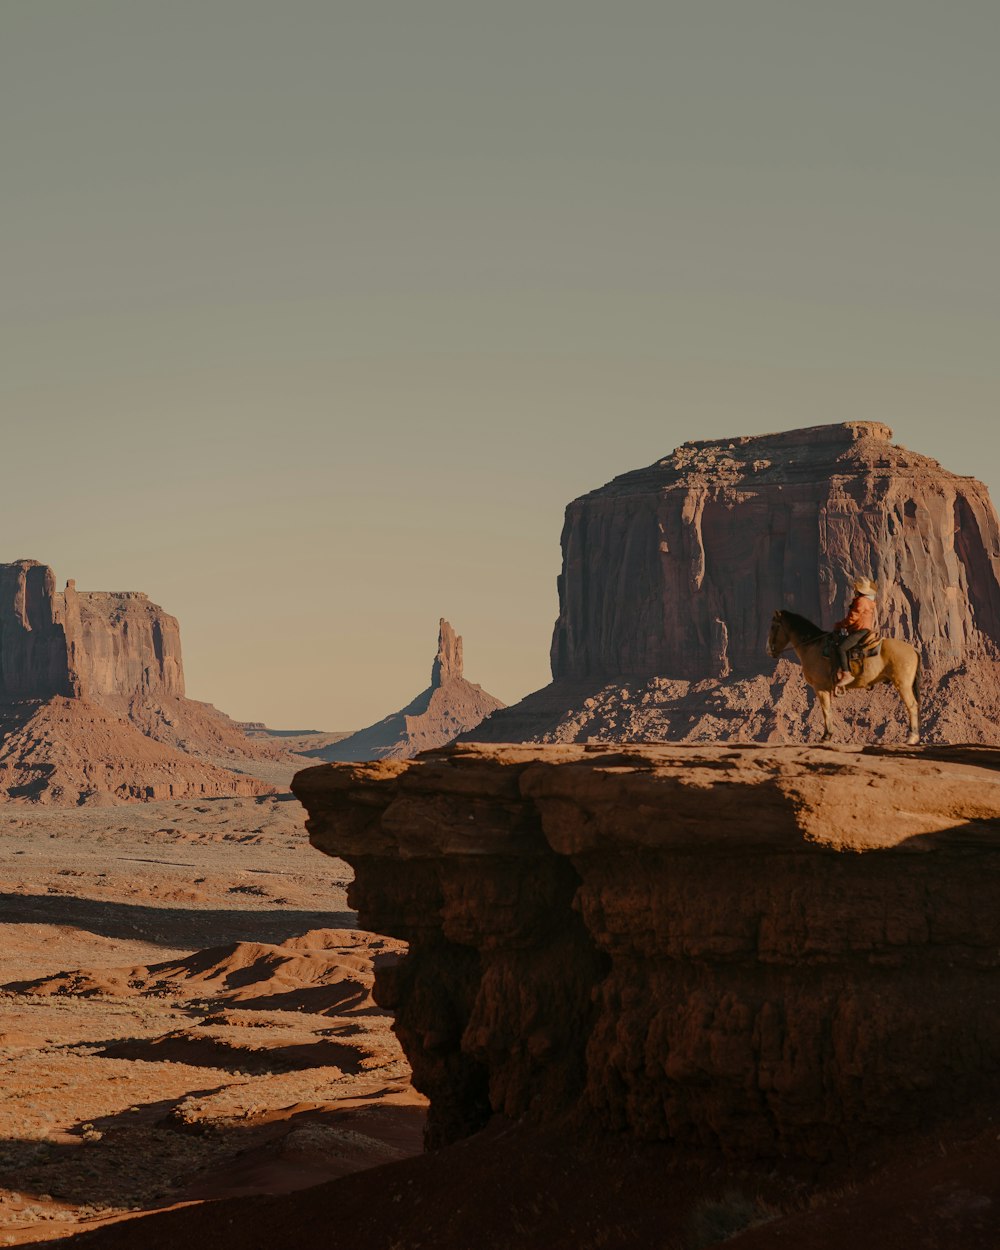 a man riding a horse on top of a cliff